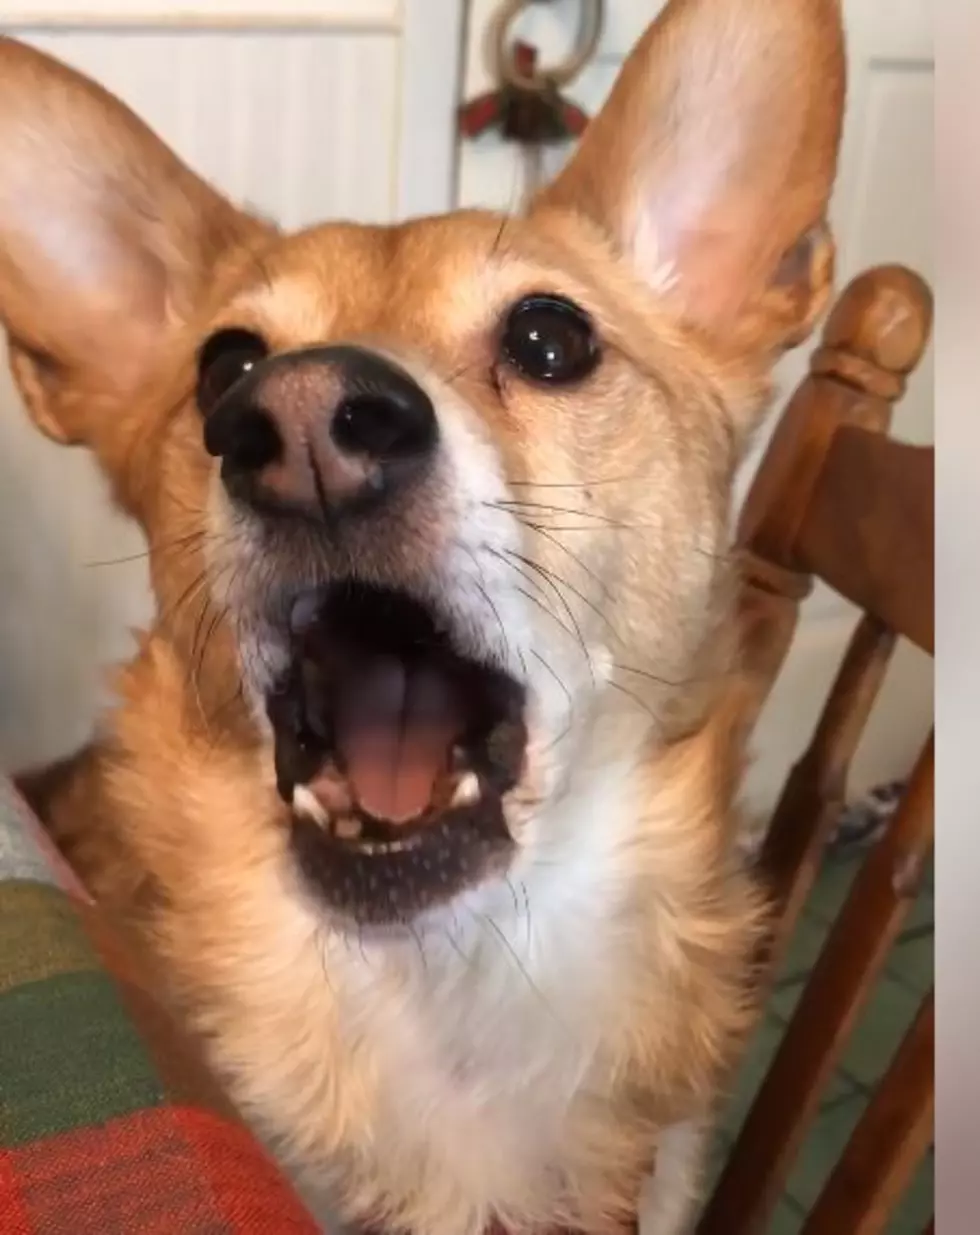 Amazing Local Dog Says &#8216;I Love You&#8217; and Sings (VIDEO)